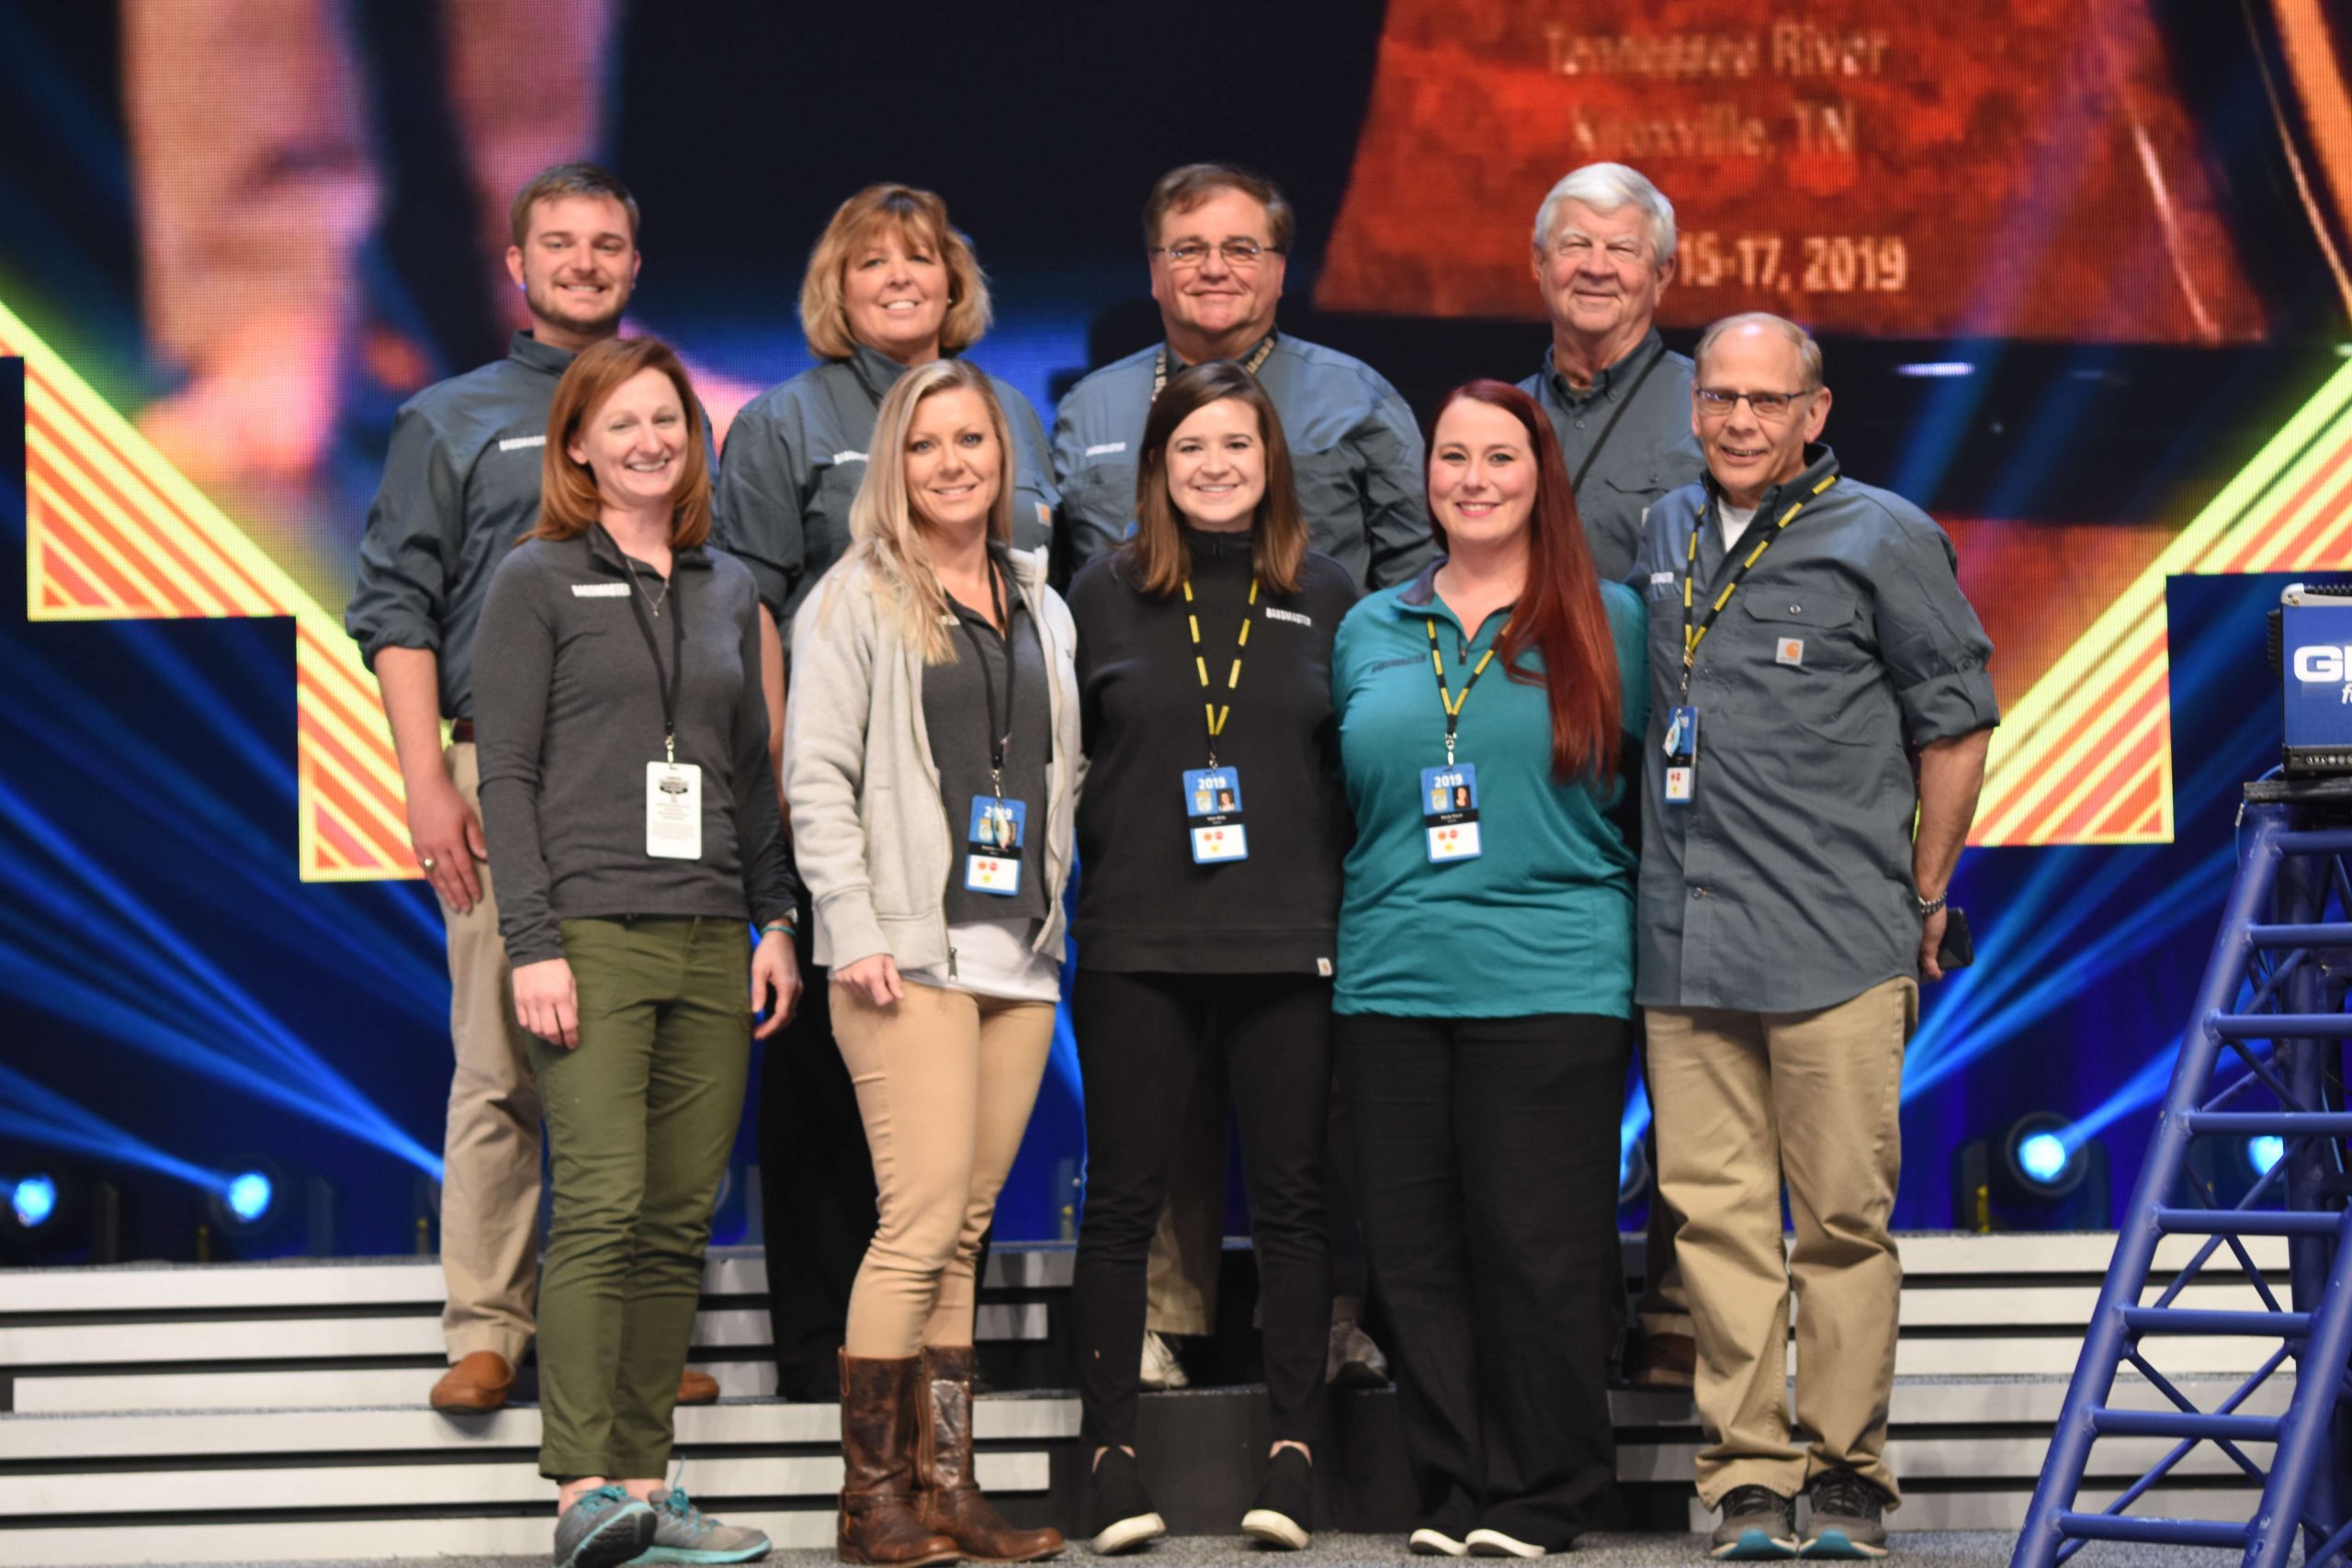 The Bassmaster Classic media relations staff joins Dave on the Classic stage.